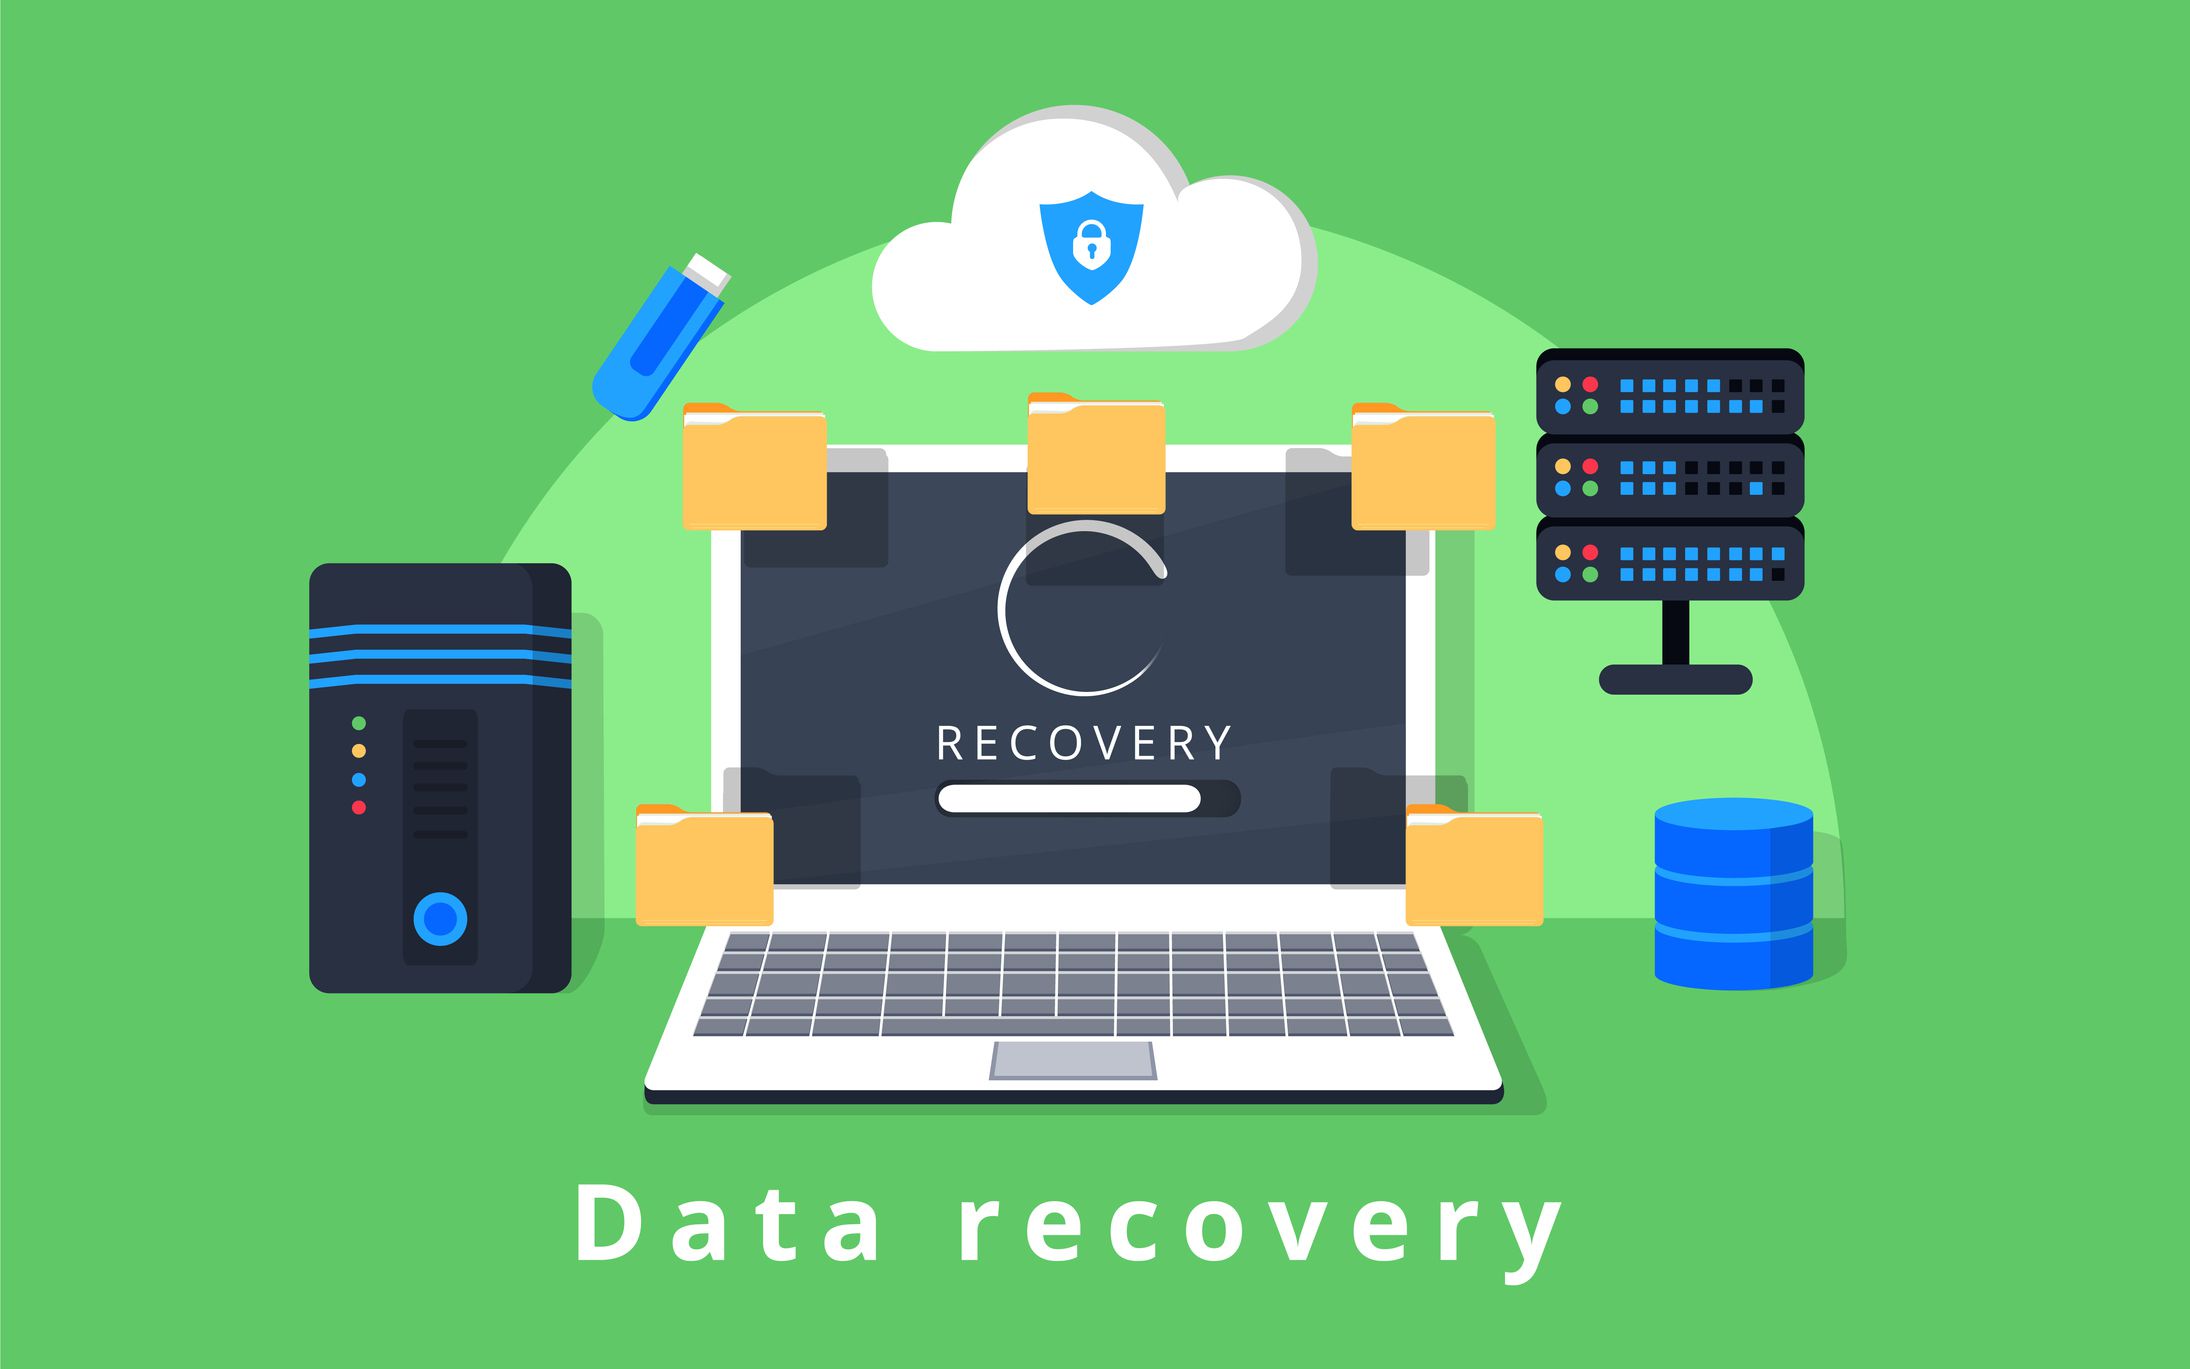 How To Data Recovery Services Files From A Deleted Flash Drive?